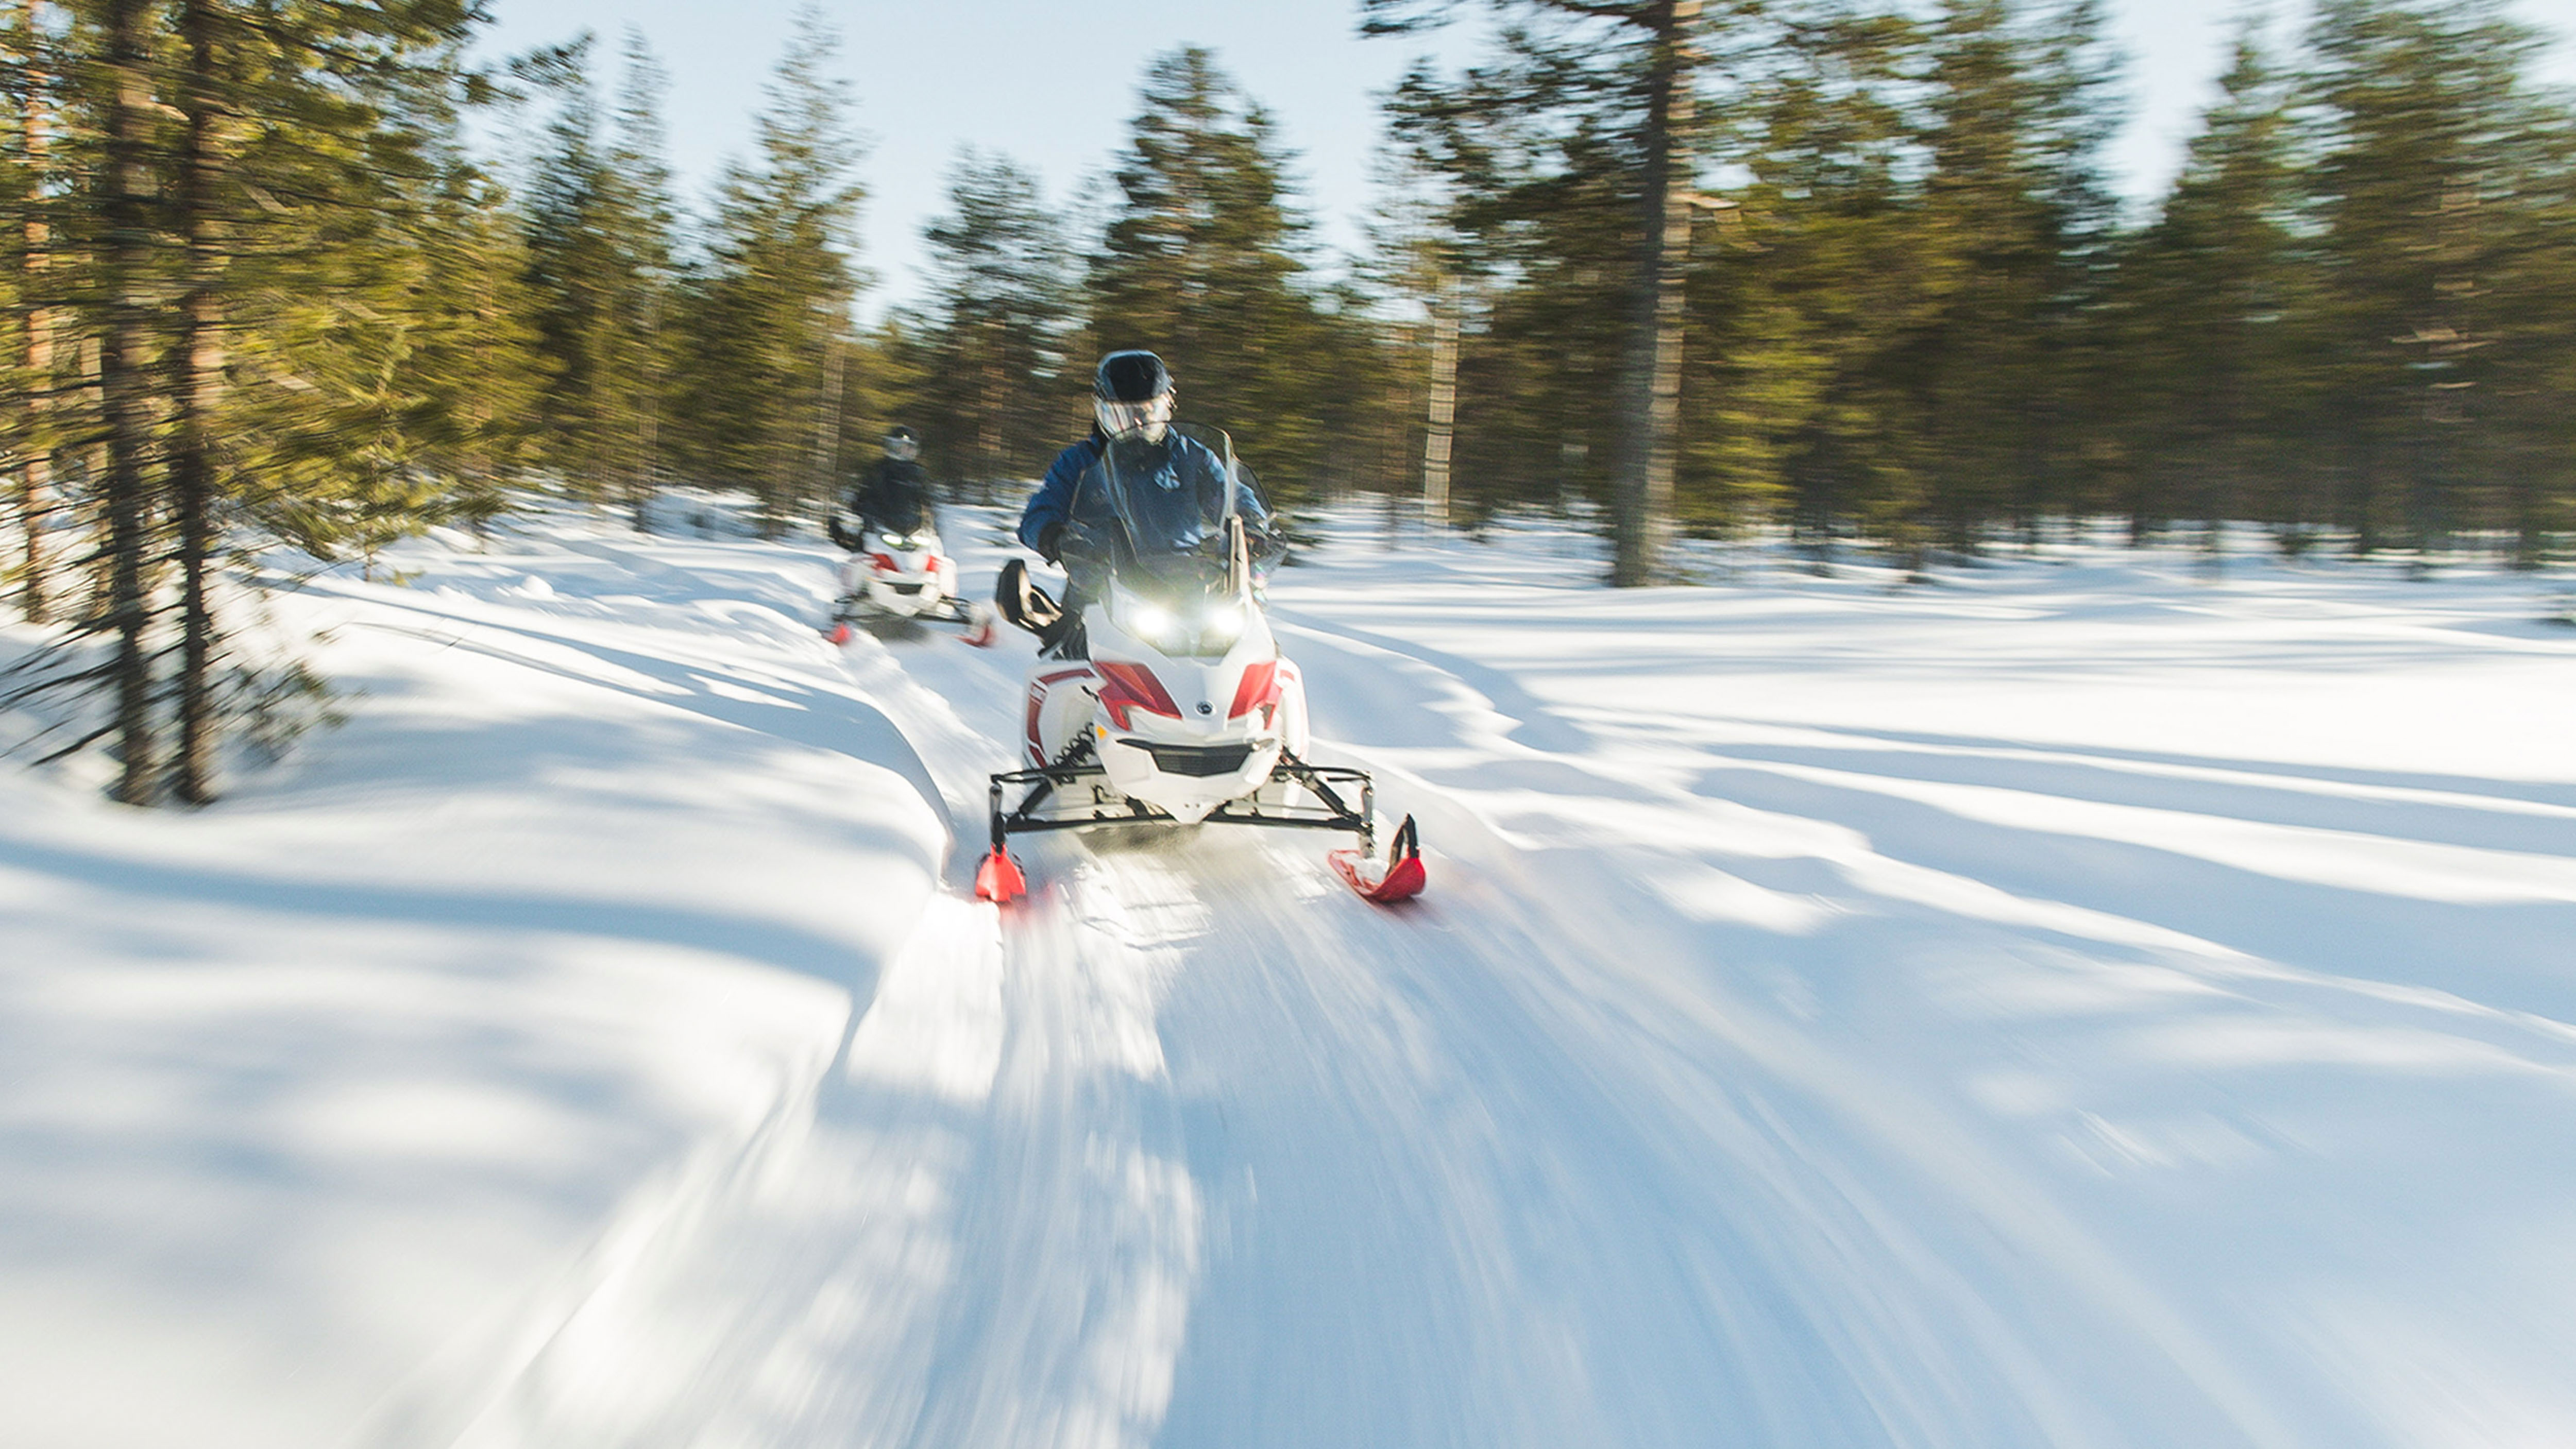 Lynx Adventure Electric snowmobile riding on trail